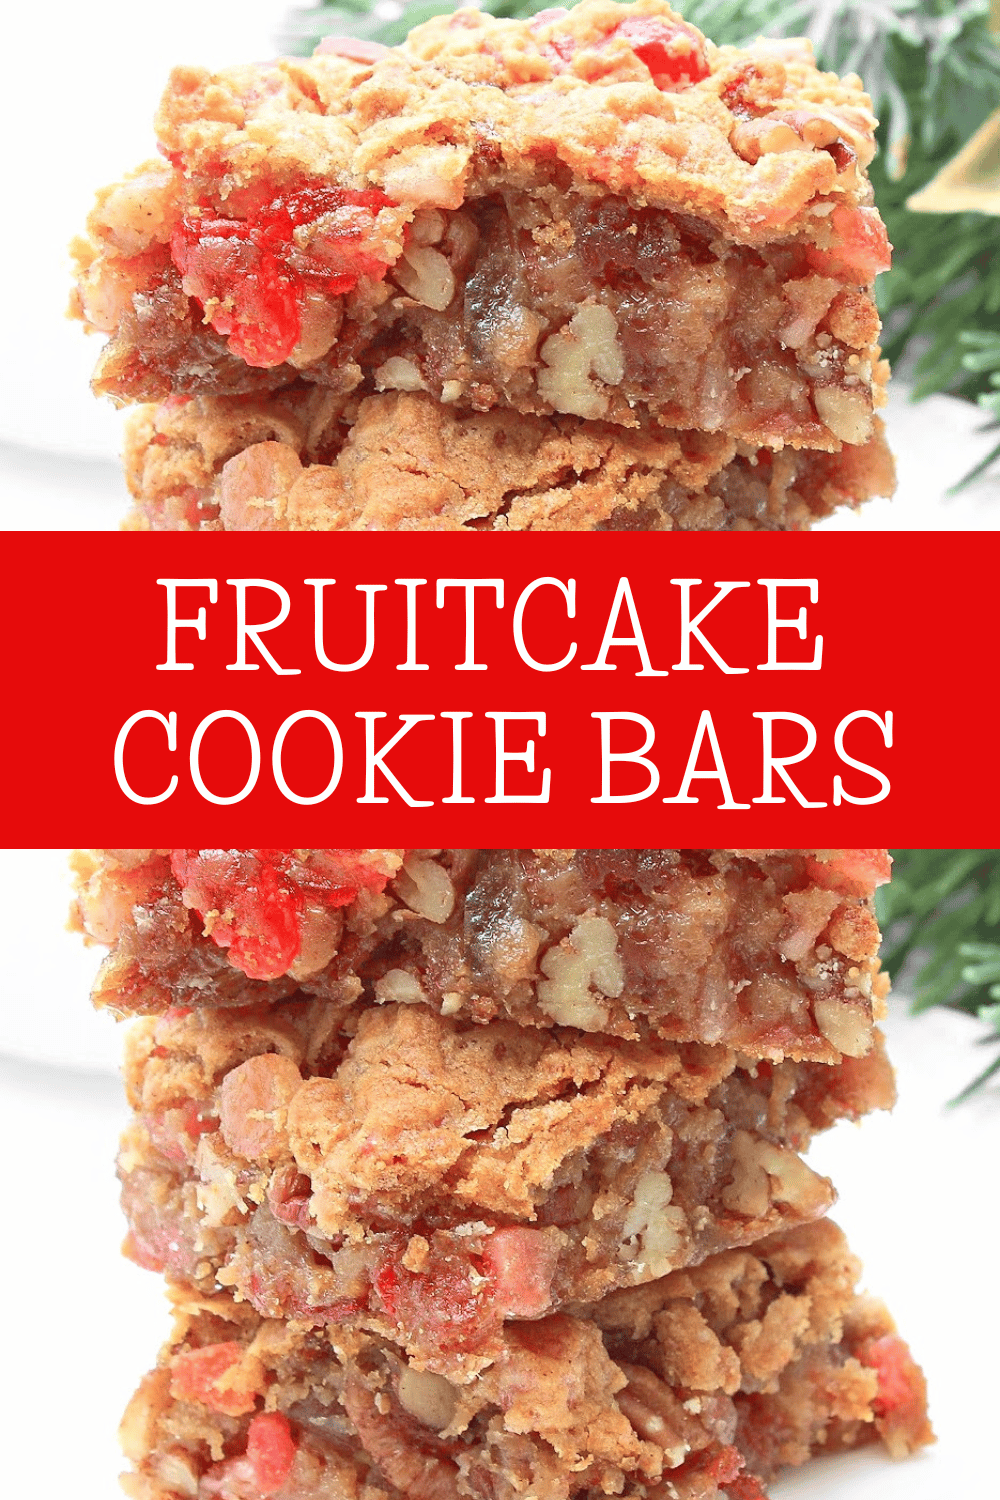 Fruitcake Bars ~ These dairy-free cookie bars are easy to make, lighter than a traditional fruitcake, and filled with holiday flavor!  via @thiswifecooks